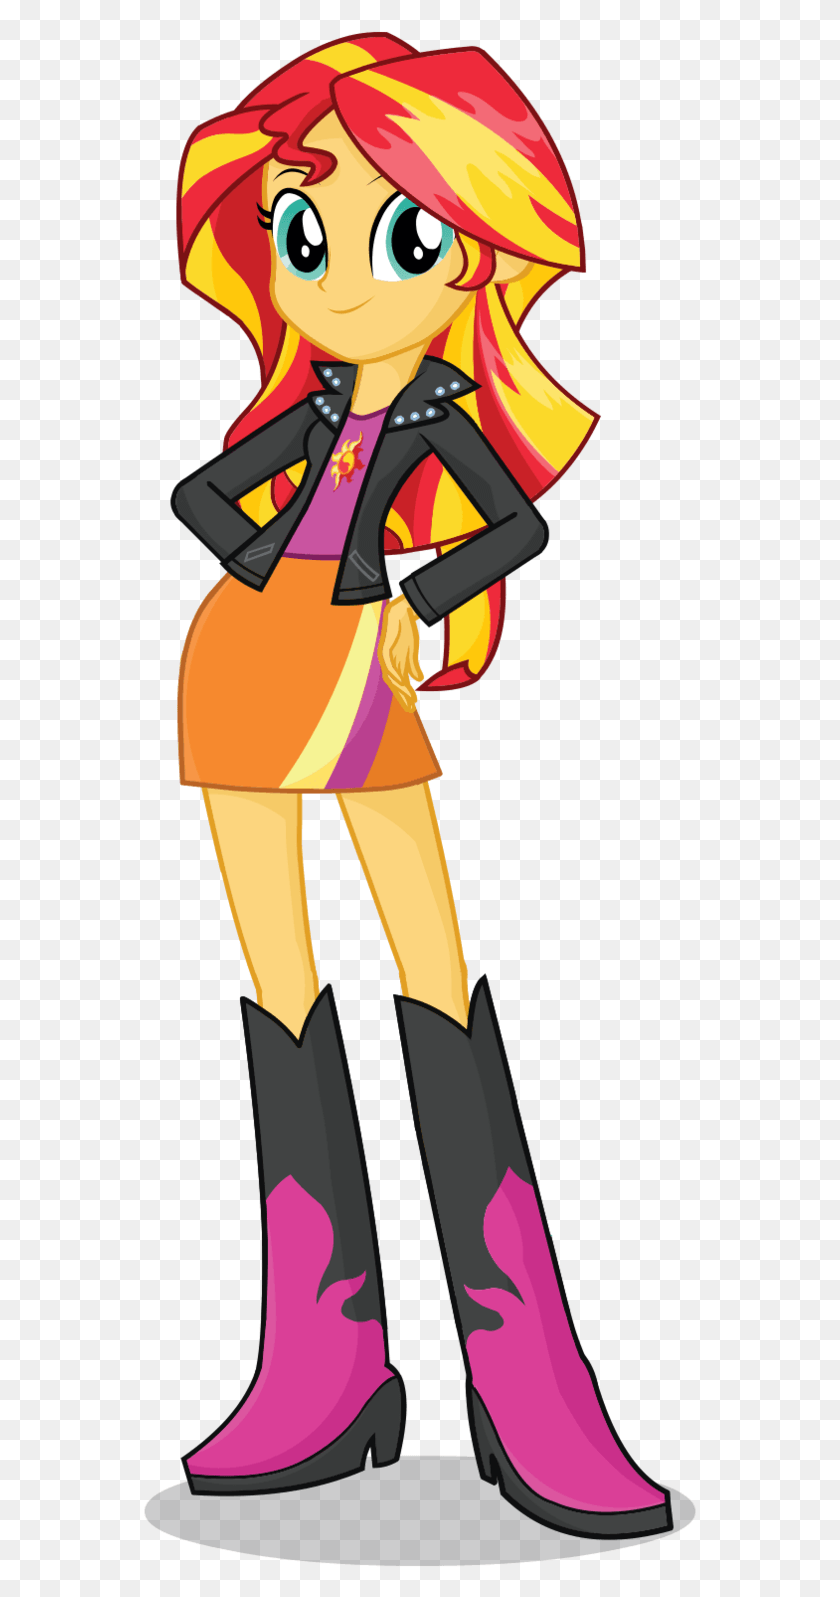 553x1537 Descargar Png Sunset Shimmer My Little Pony Equestria Girls Mane, Persona, Ropa Hd Png